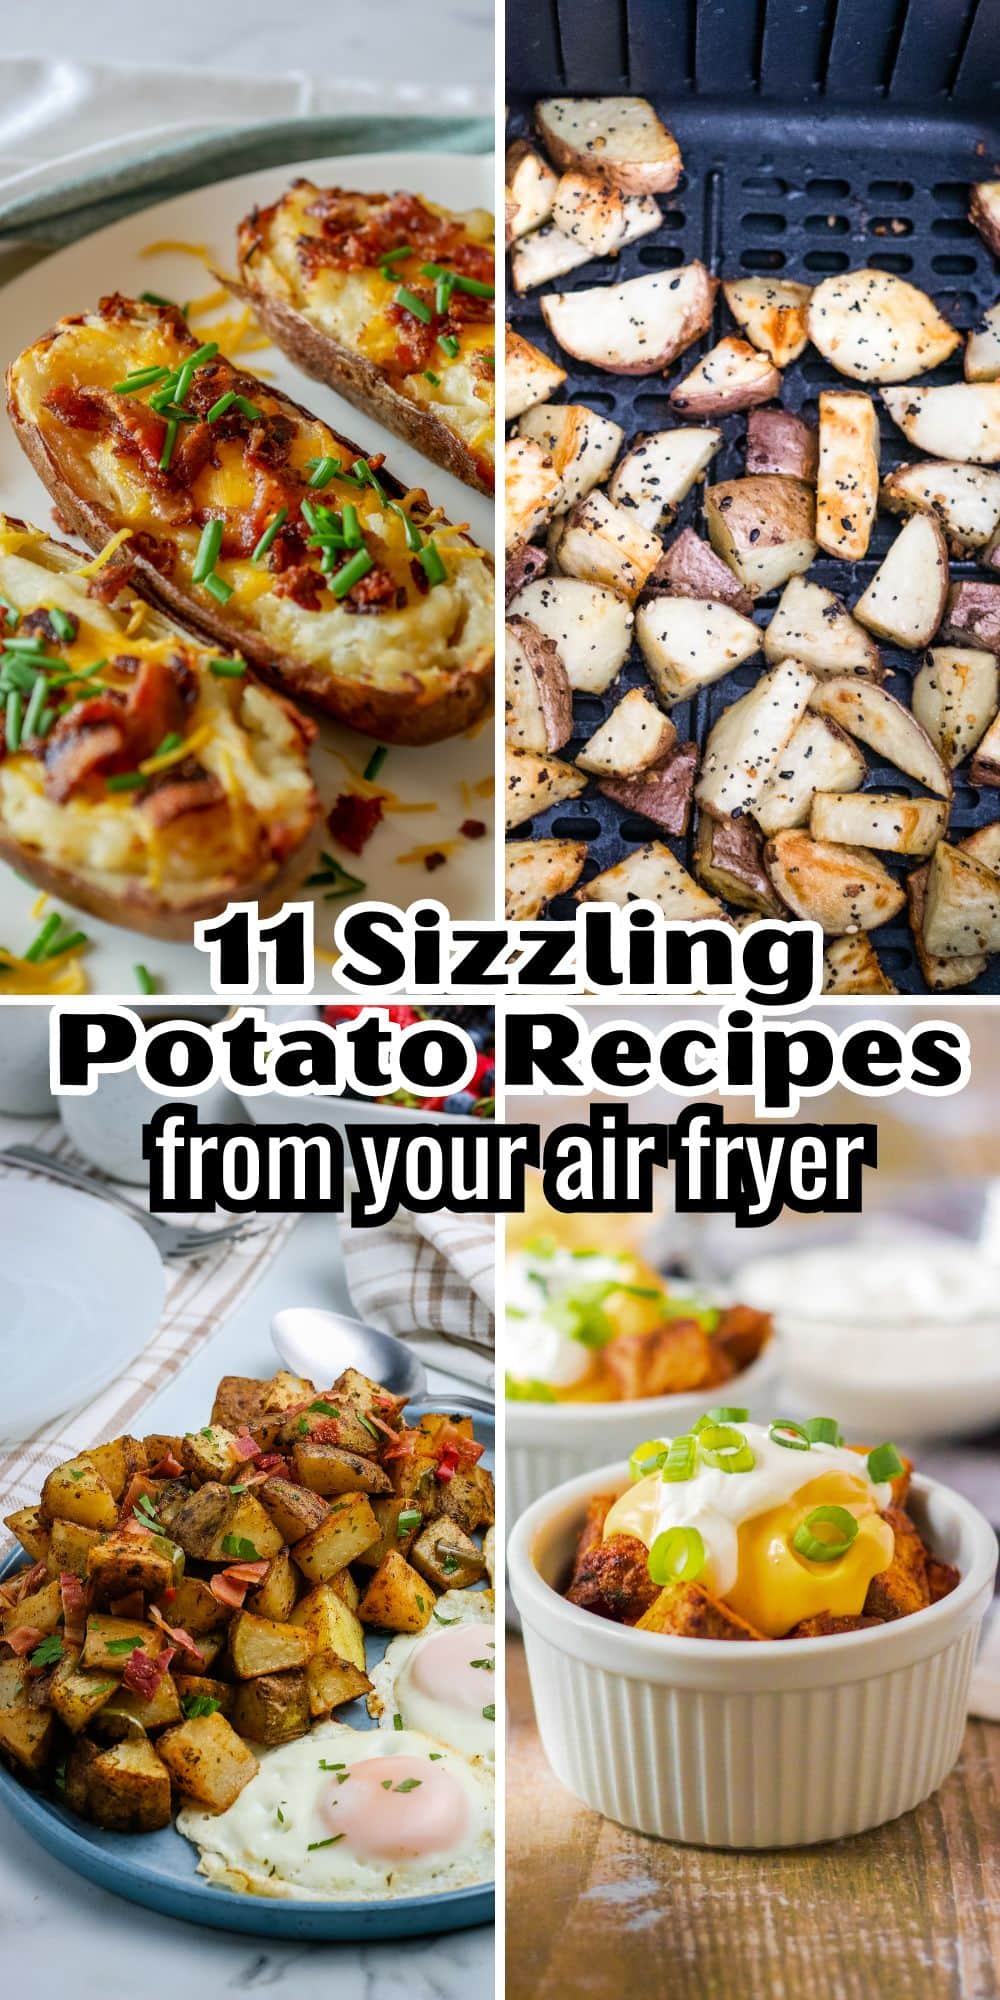 11 sizzling potato recipes from your air fryer.